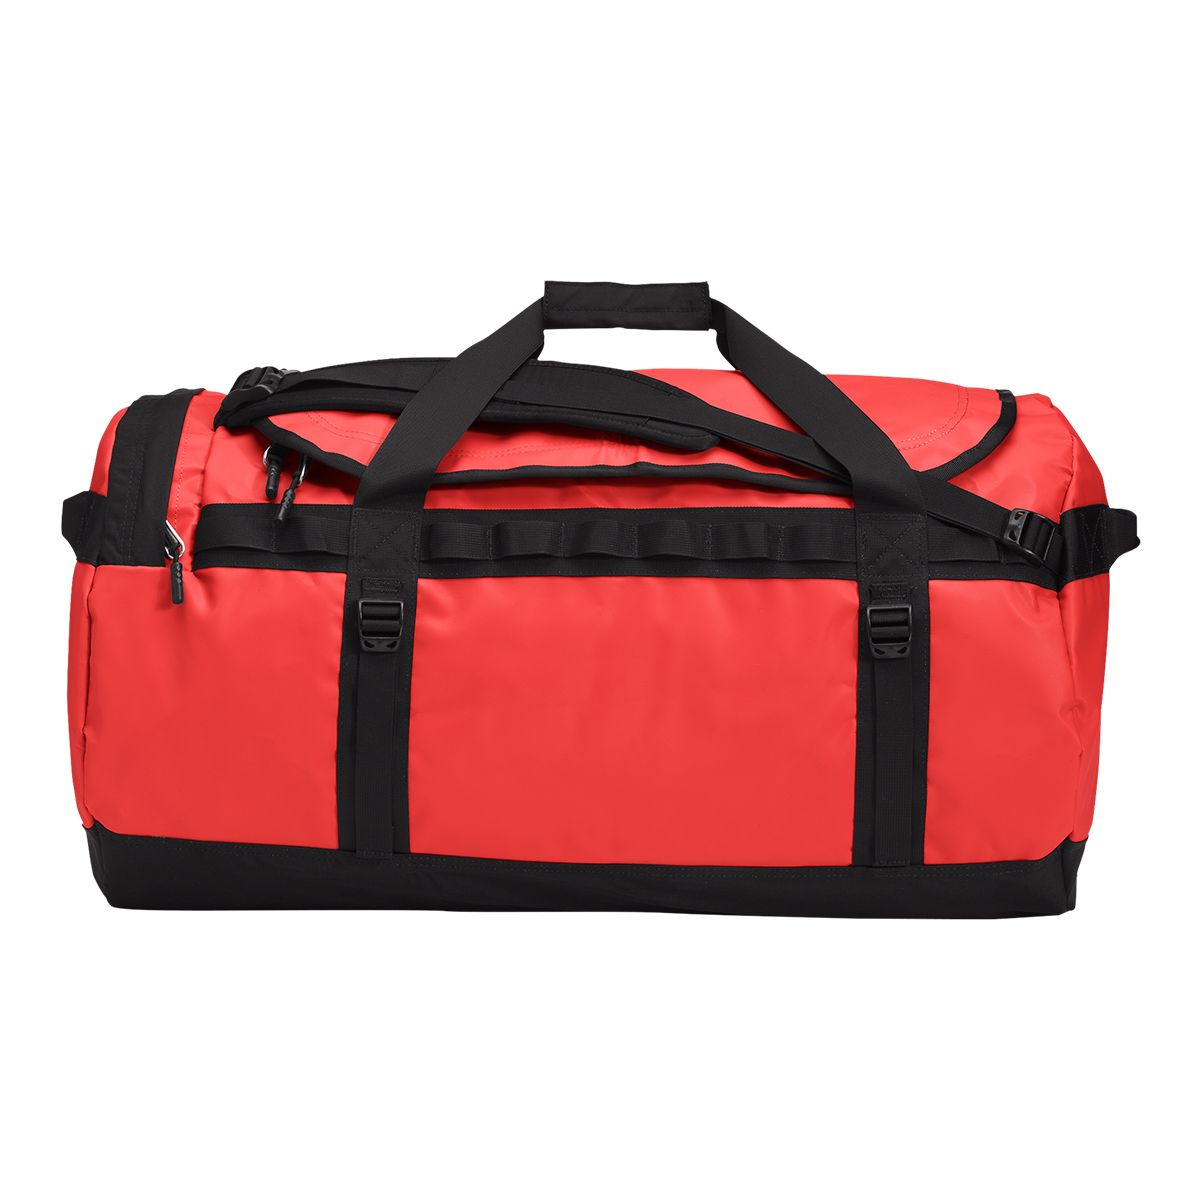 The North Face Base Camp 95L Large Duffel Bag